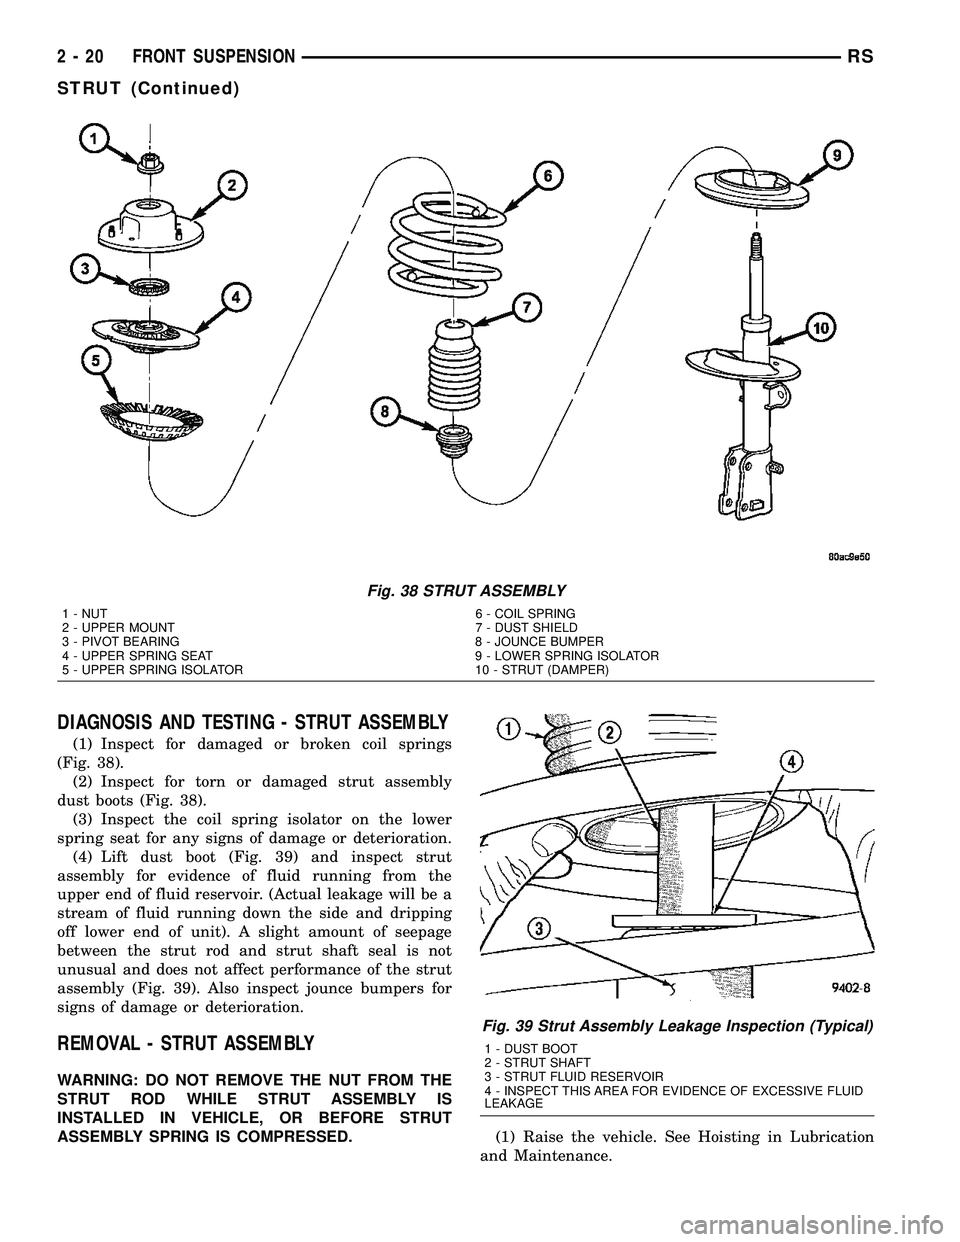 CHRYSLER VOYAGER 2005  Service Manual DIAGNOSIS AND TESTING - STRUT ASSEMBLY
(1) Inspect for damaged or broken coil springs
(Fig. 38).
(2) Inspect for torn or damaged strut assembly
dust boots (Fig. 38).
(3) Inspect the coil spring isolat